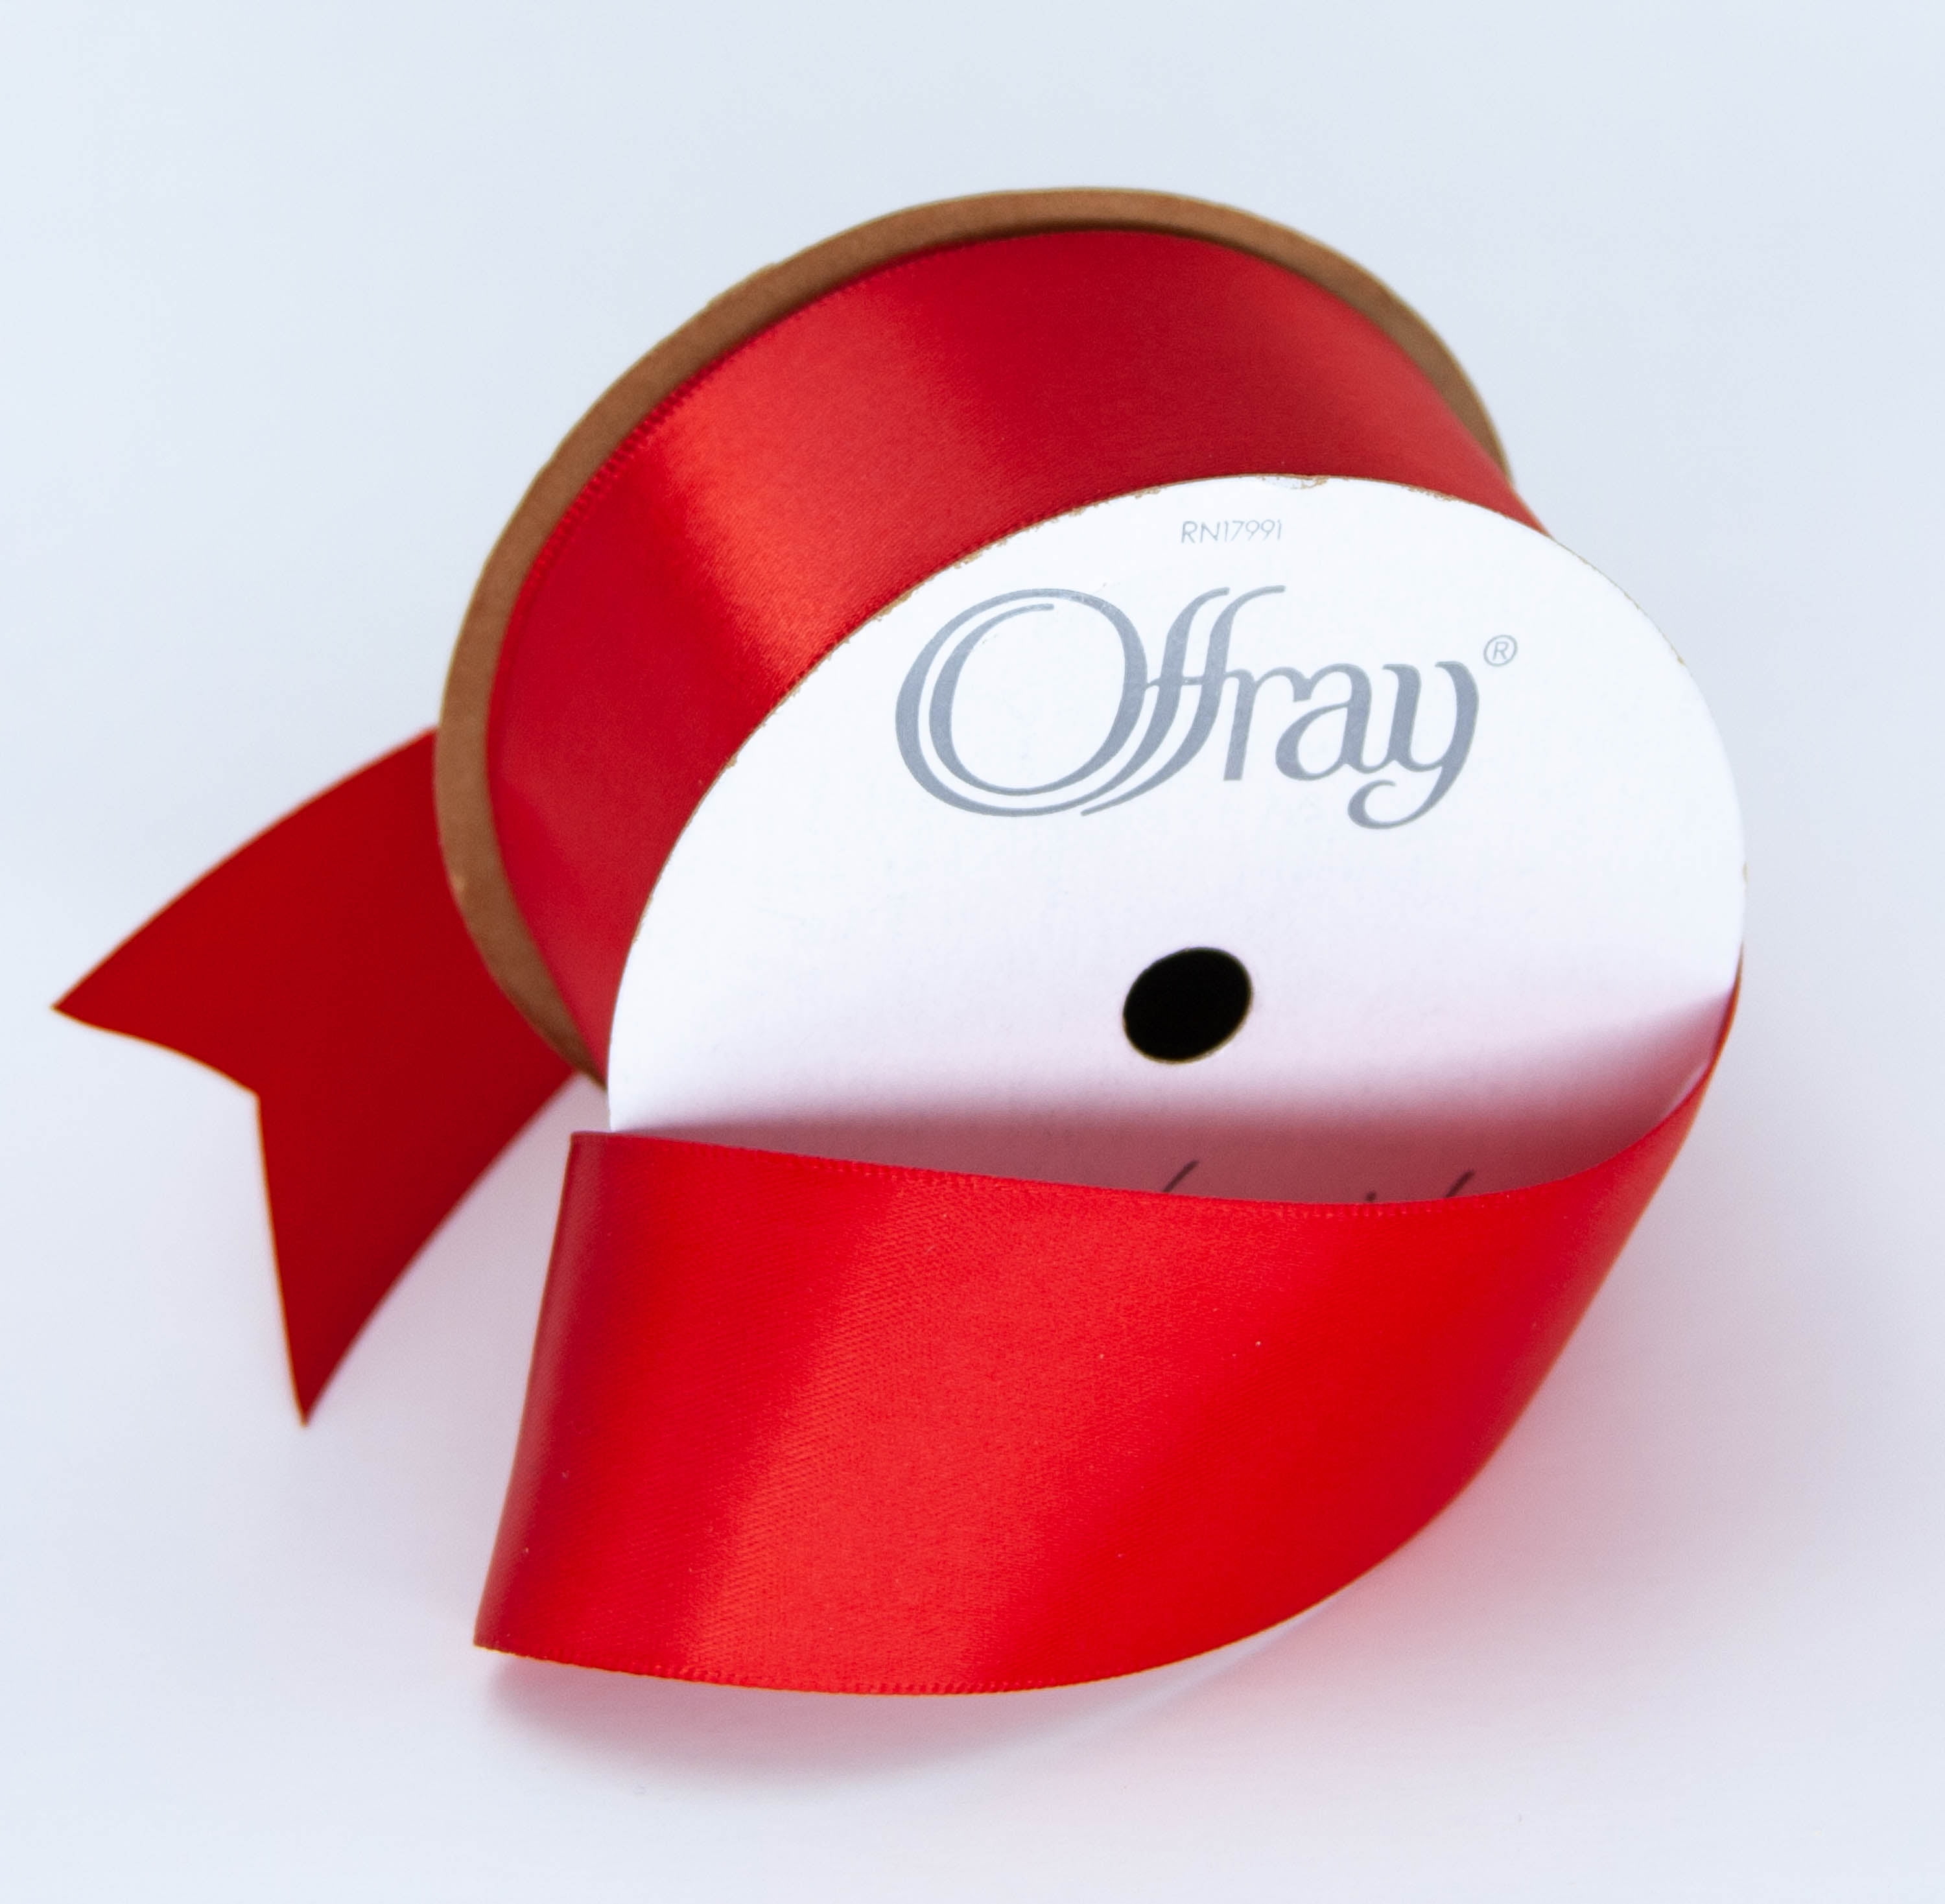 Offray Double Face Satin Ribbon 1/8X30yd-Red